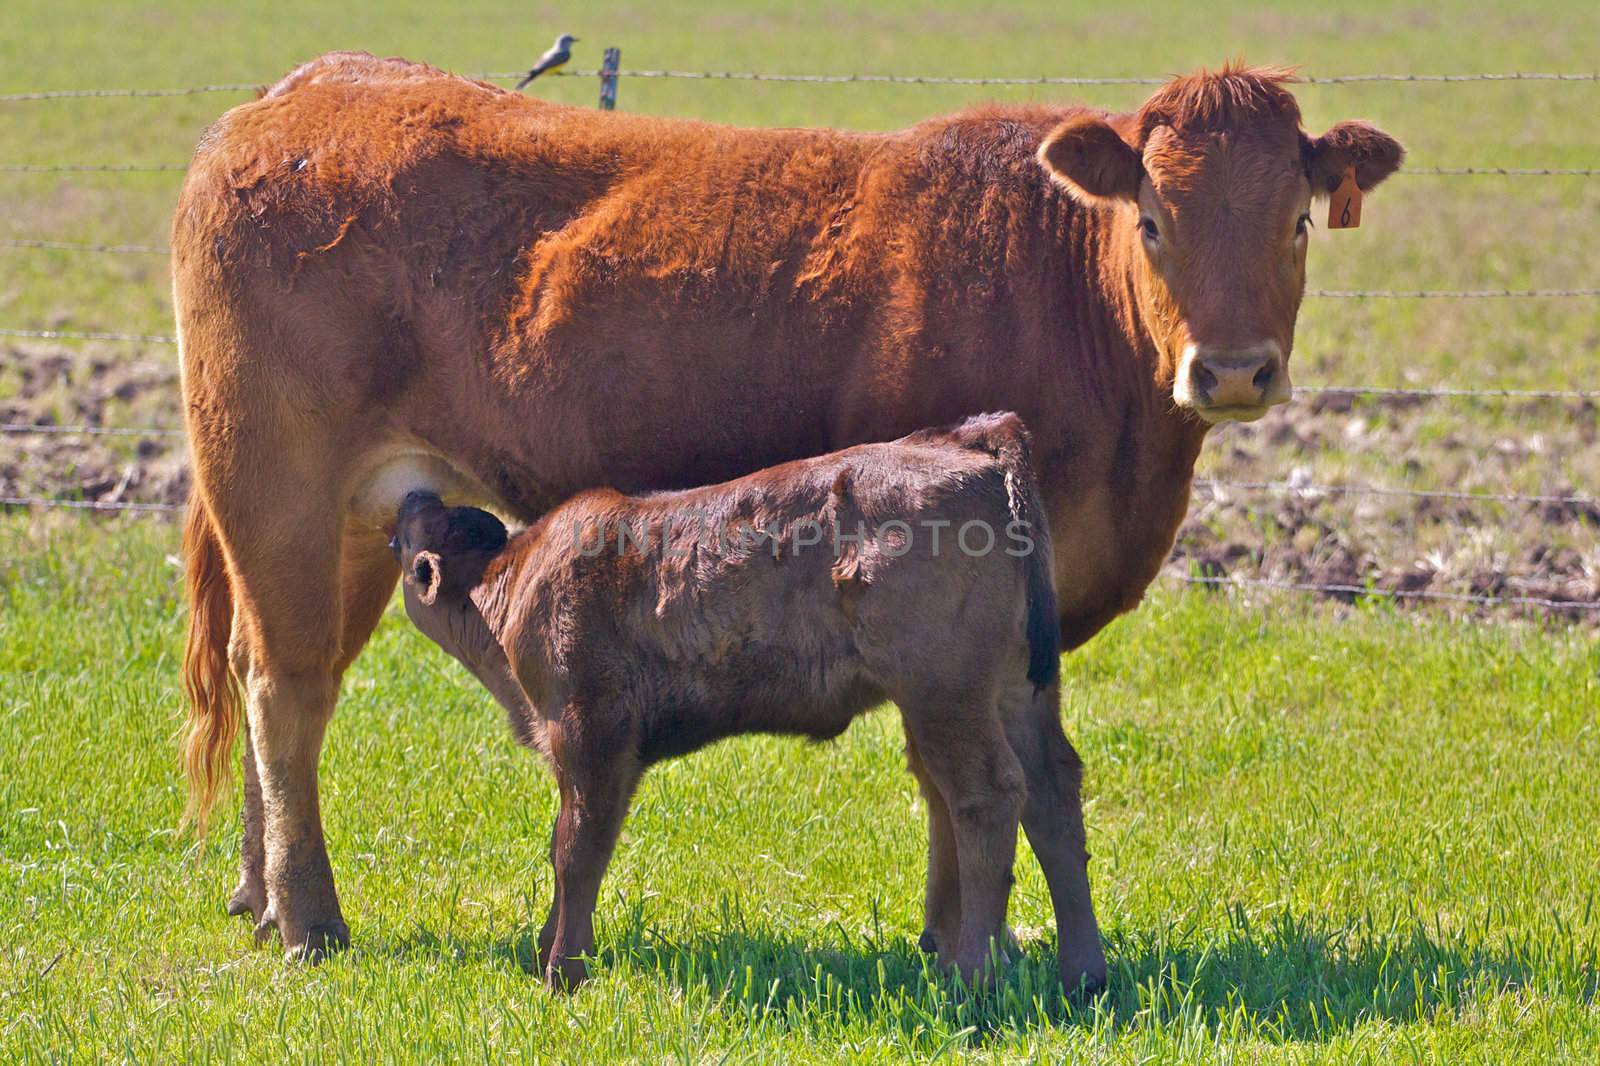 Mother Cow with Nursing Calf by shalomyoseph